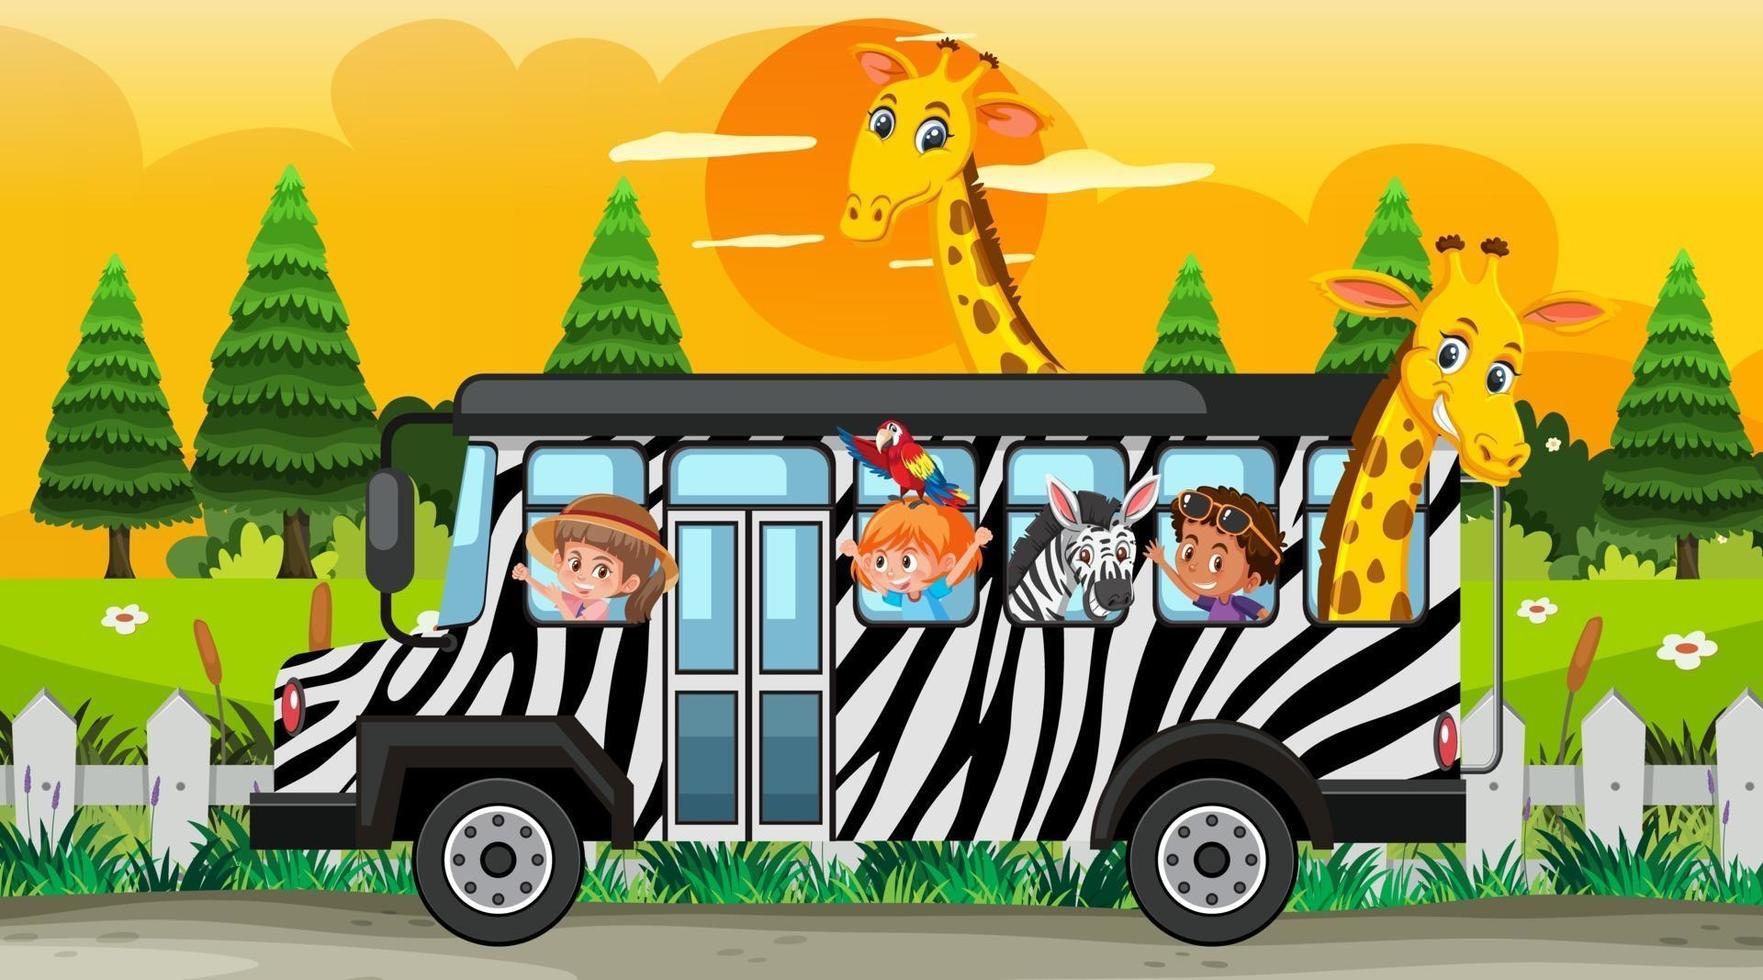 Safari at sunset scene with children and animals on the bus vector